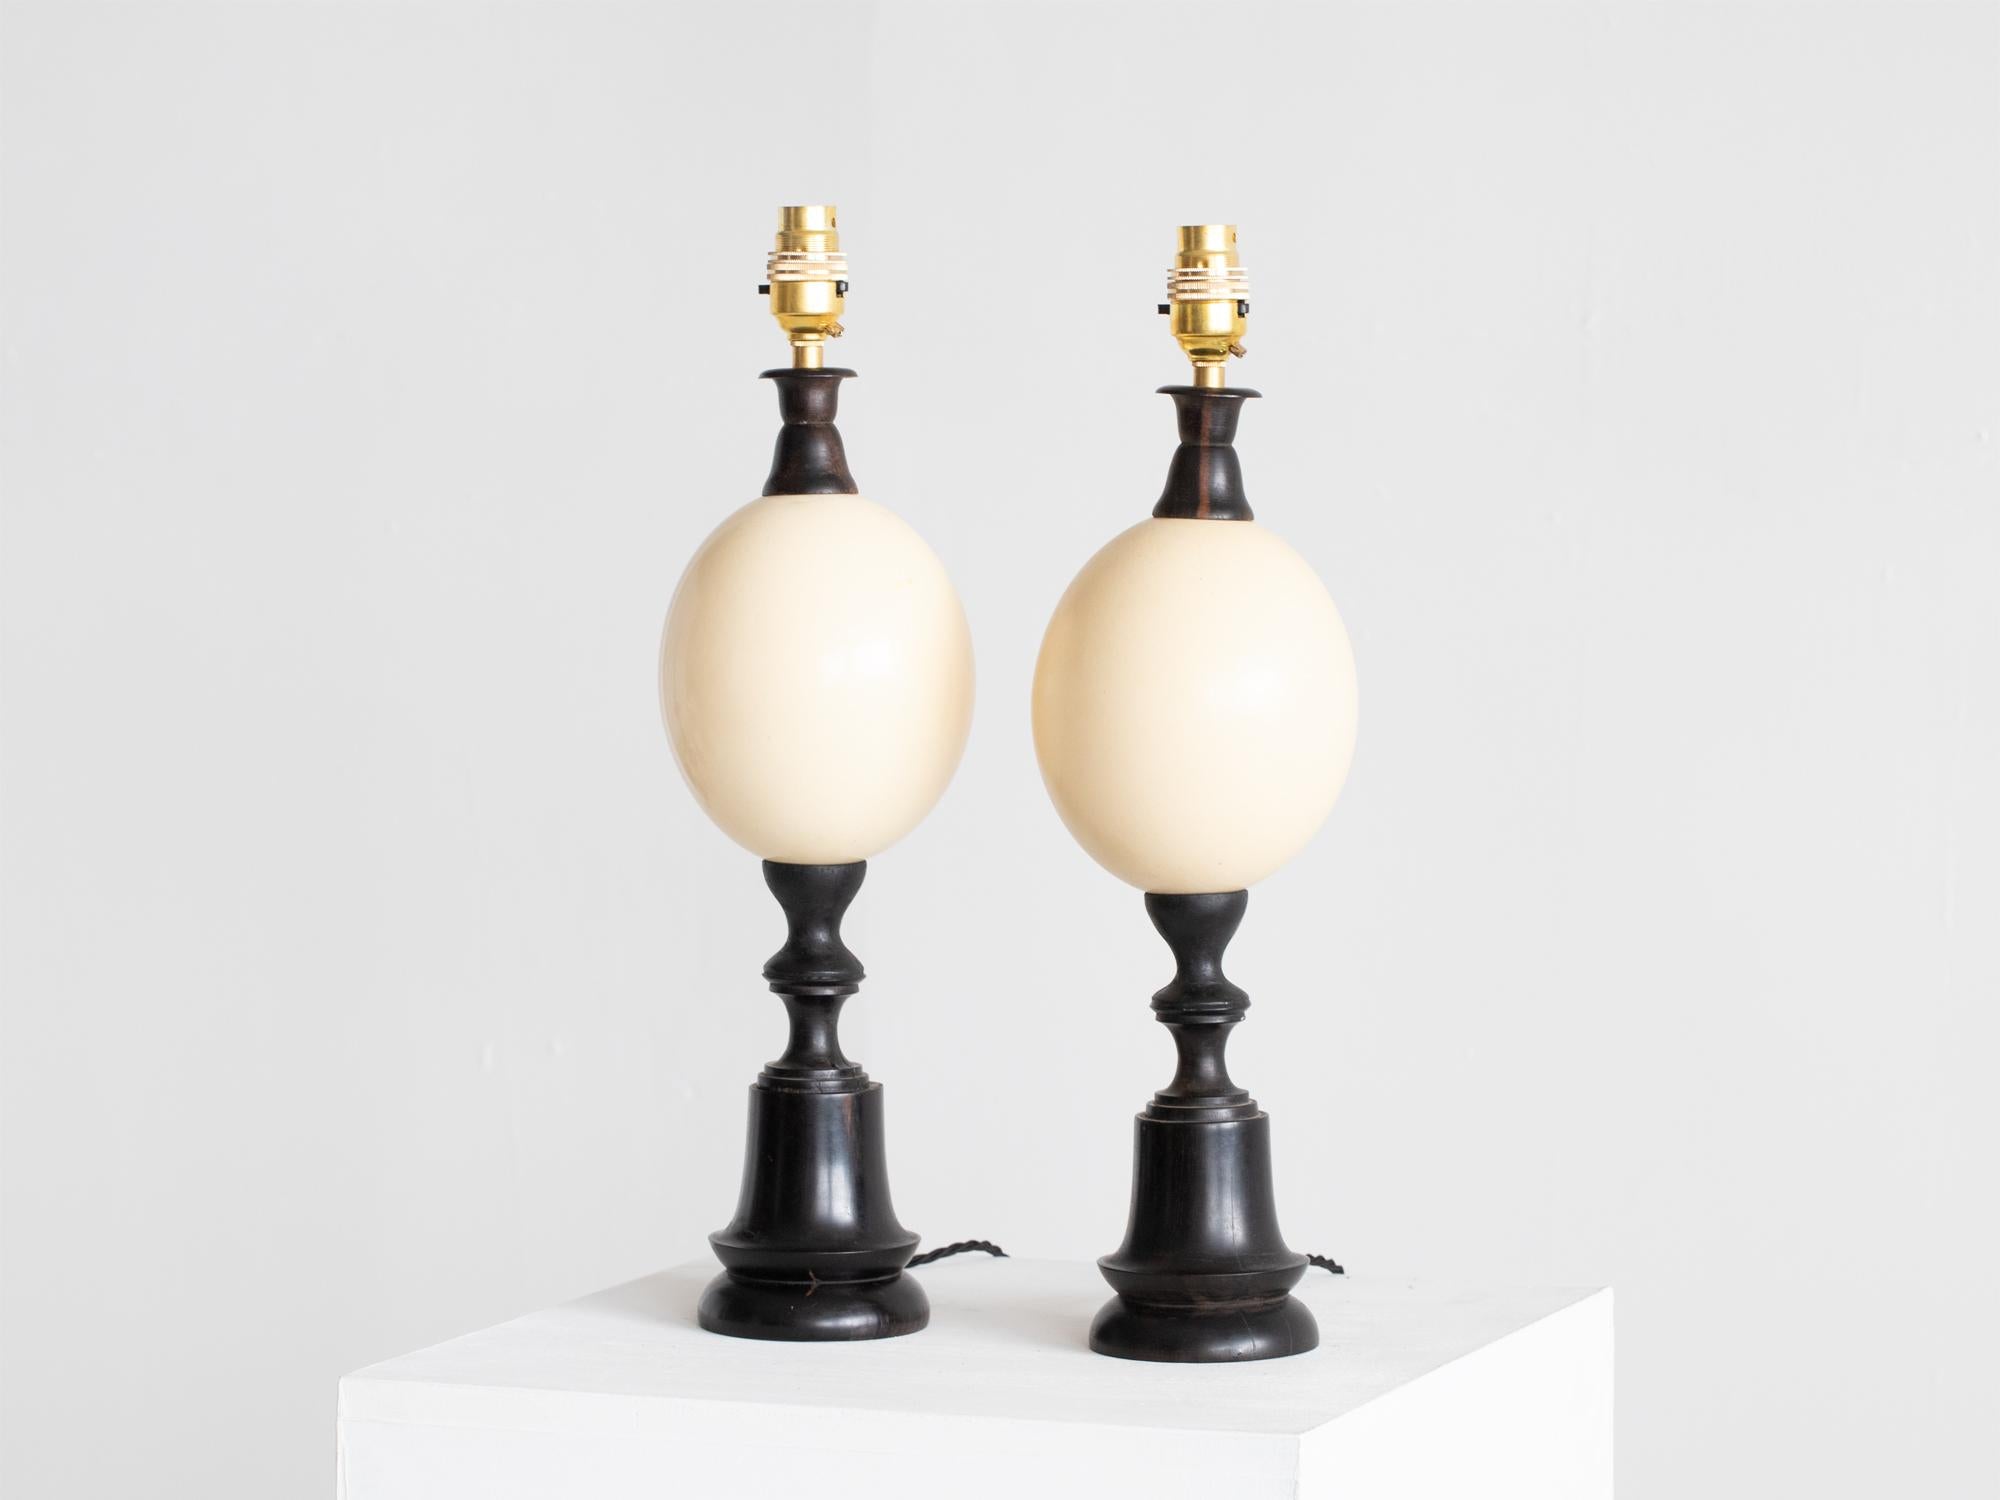 A pair of ostrich egg table lamps. French, early-mid 20C.

Hand-turned ebonised columns with subtle variations in size.

Professionally re-wired.

Sold as a pair.

46 x 12 x 12 cm

18.1 x 4.7 x 4.7 